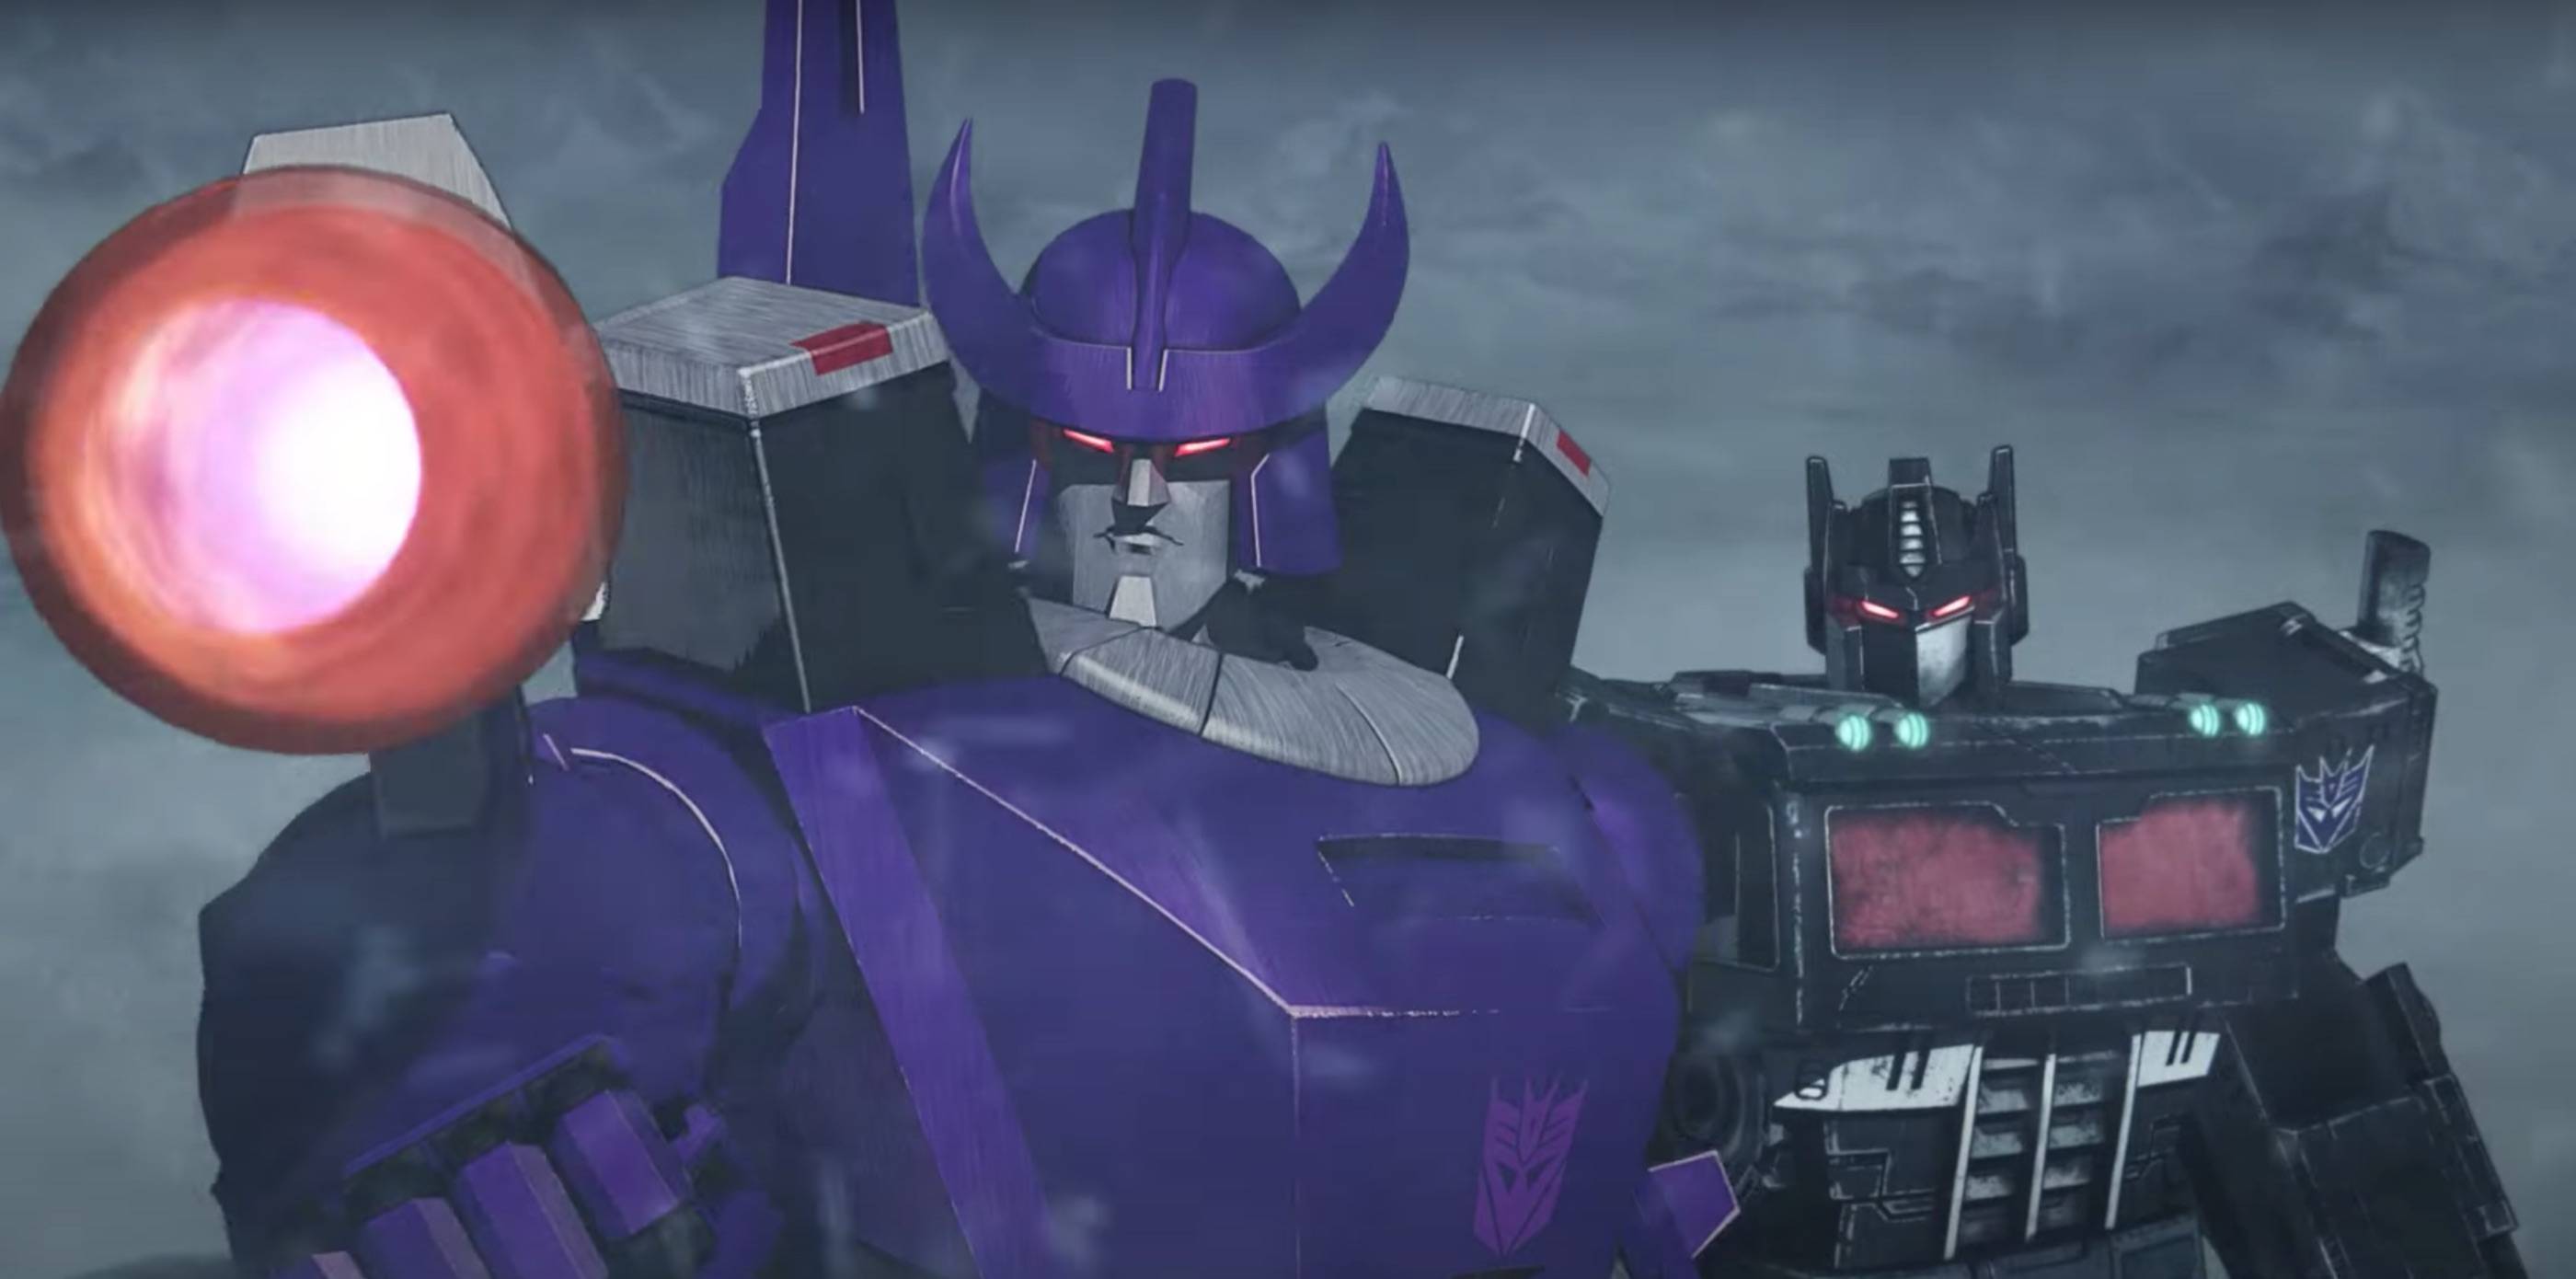 Transformers: War for Cybertron: Kingdom Trailer Reveals the Final Battle  Between Autobots and Decepticons